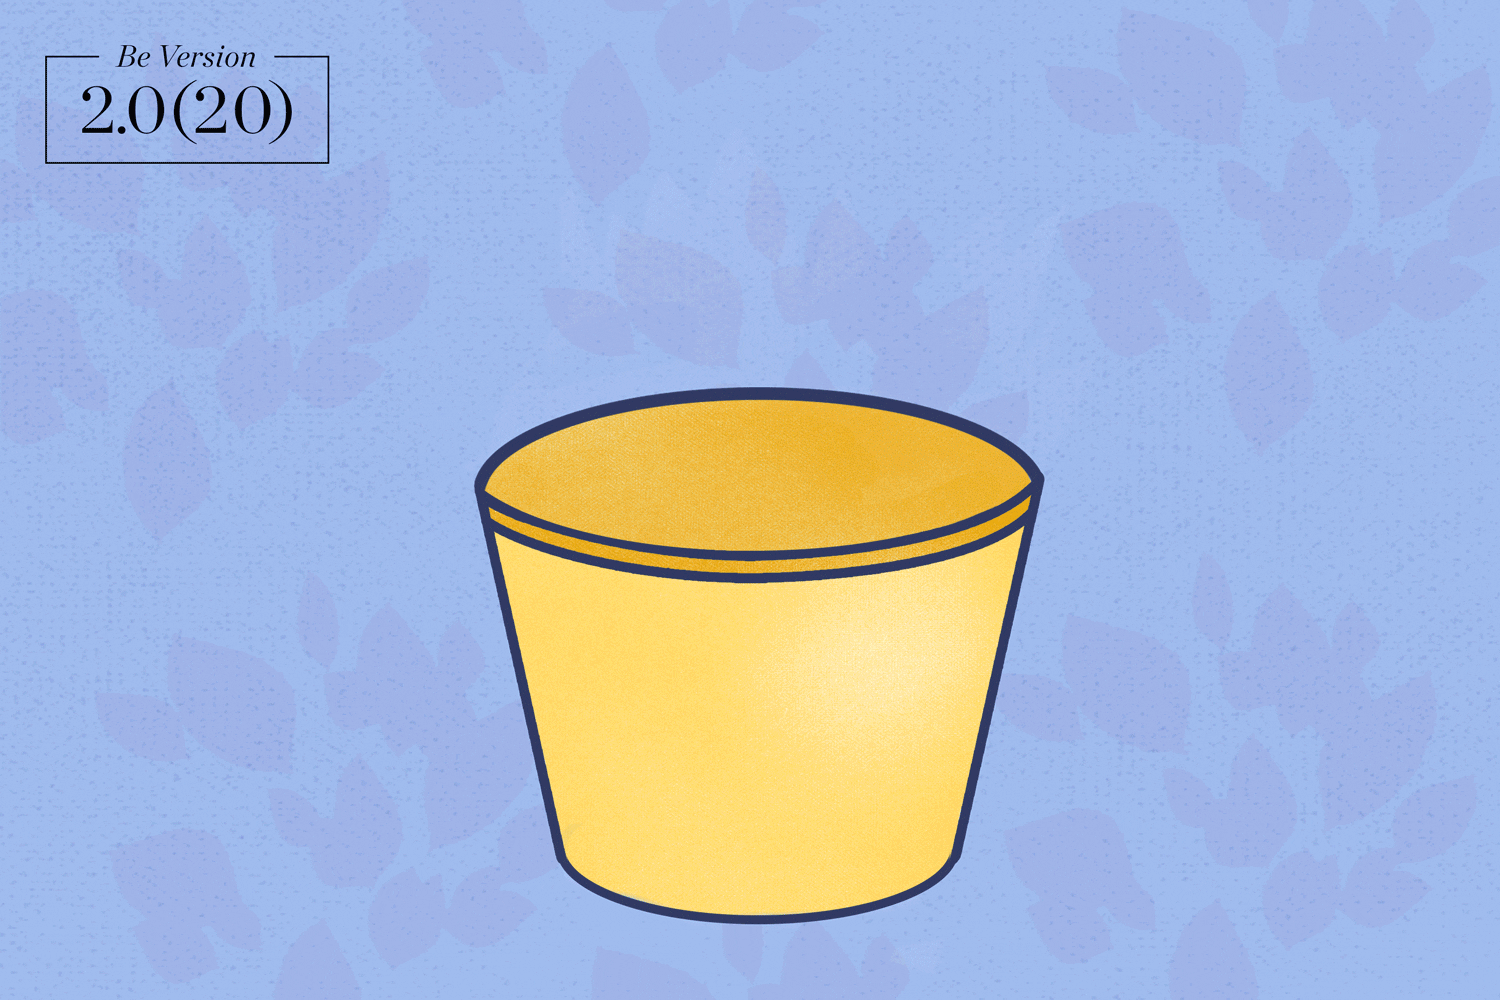 An animated illustration of a succulent growing in a gold pot.